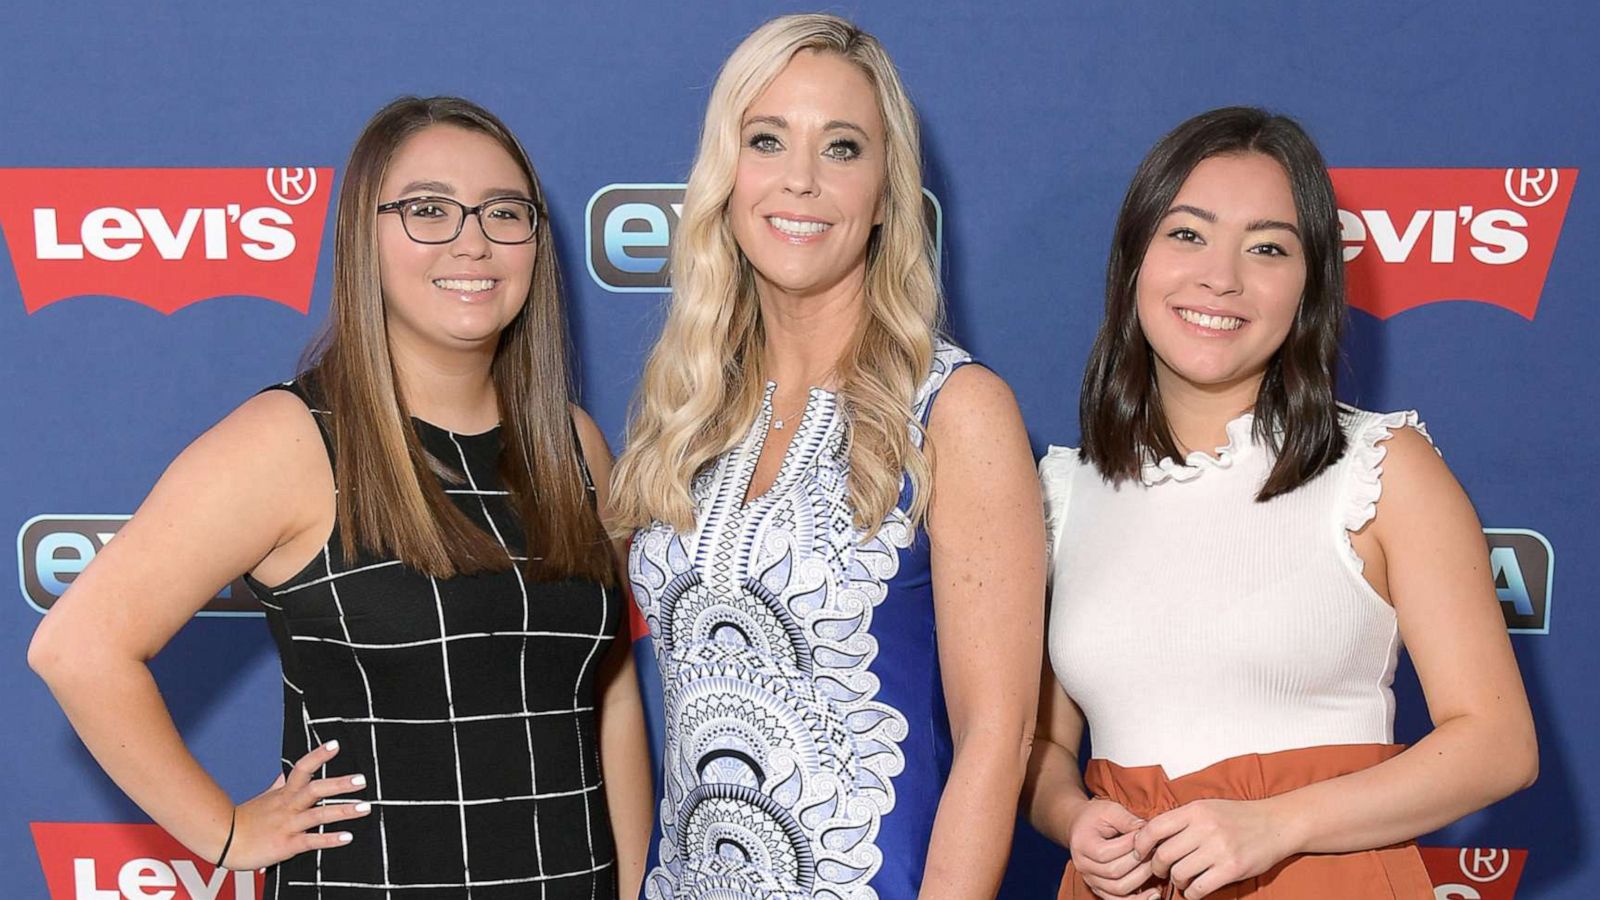 PHOTO: Cara Gosselin, Kate Gosselin and Mady Gosselin of the reality TV show "Kate Plus 8" on June 11, 2019 in New York City.